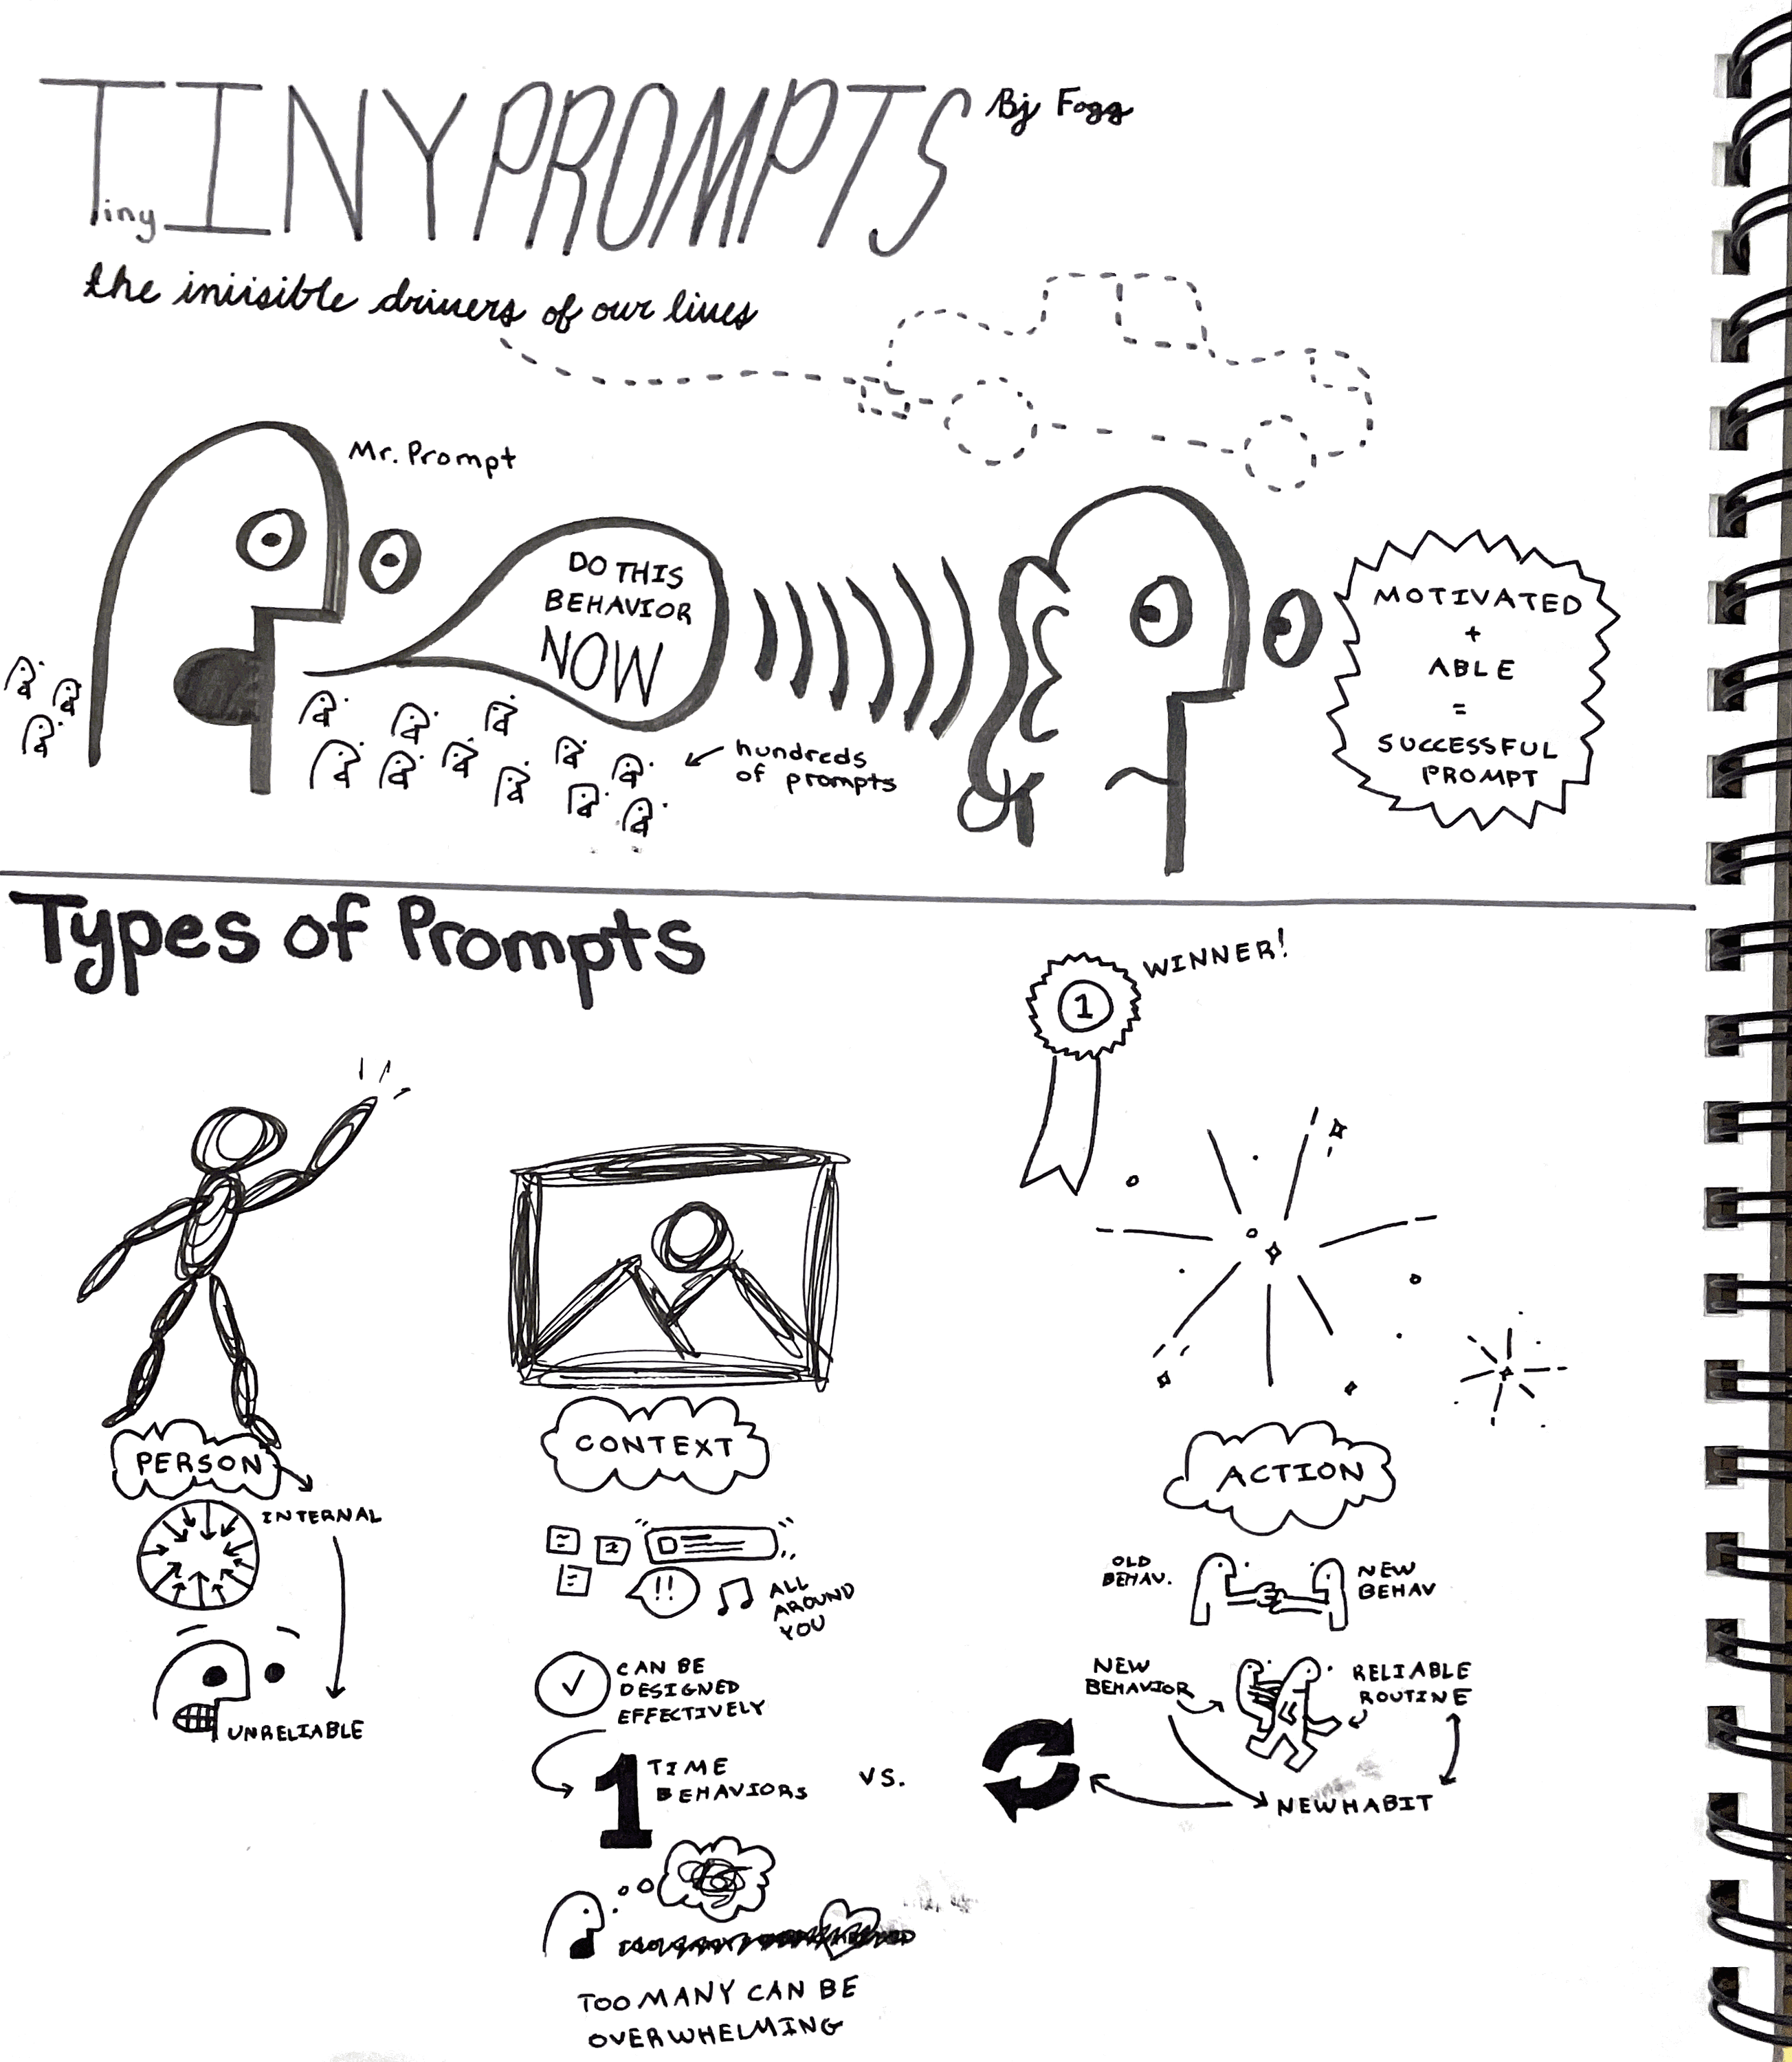 Sketchnotes about "Tiny Prompts"